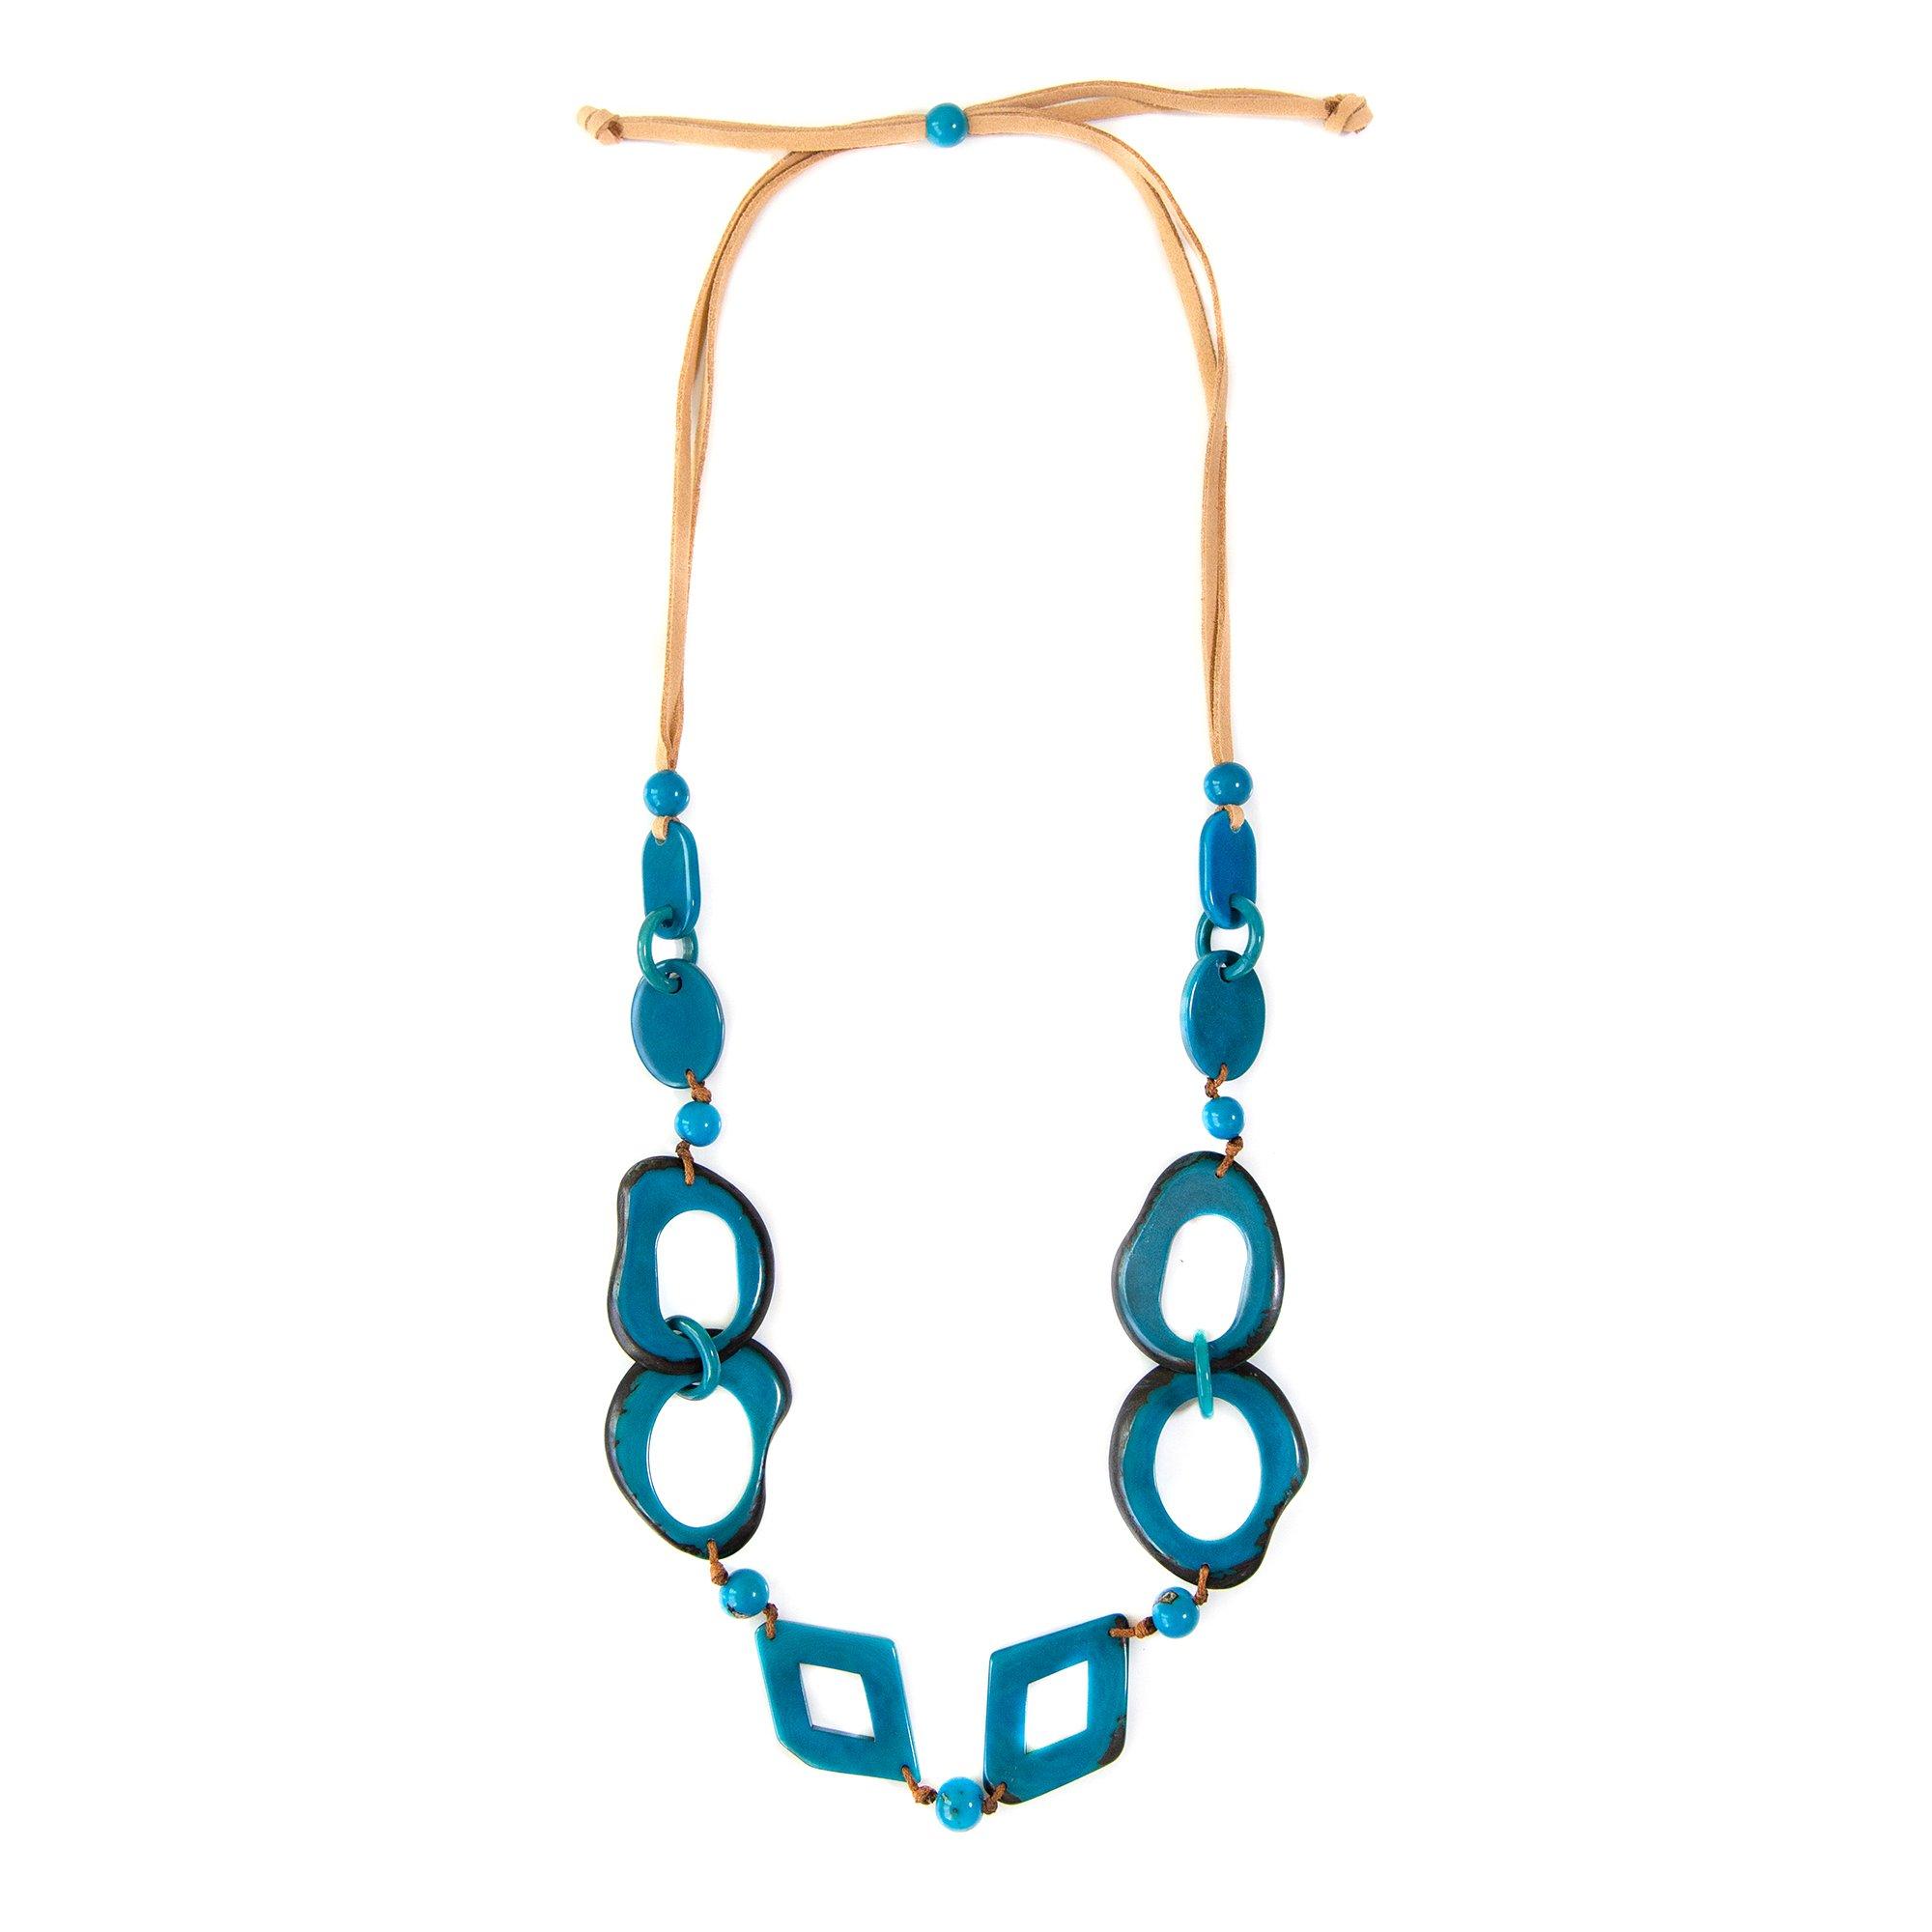 24 In. Solid Beads & Links Adjustable Cord Necklace